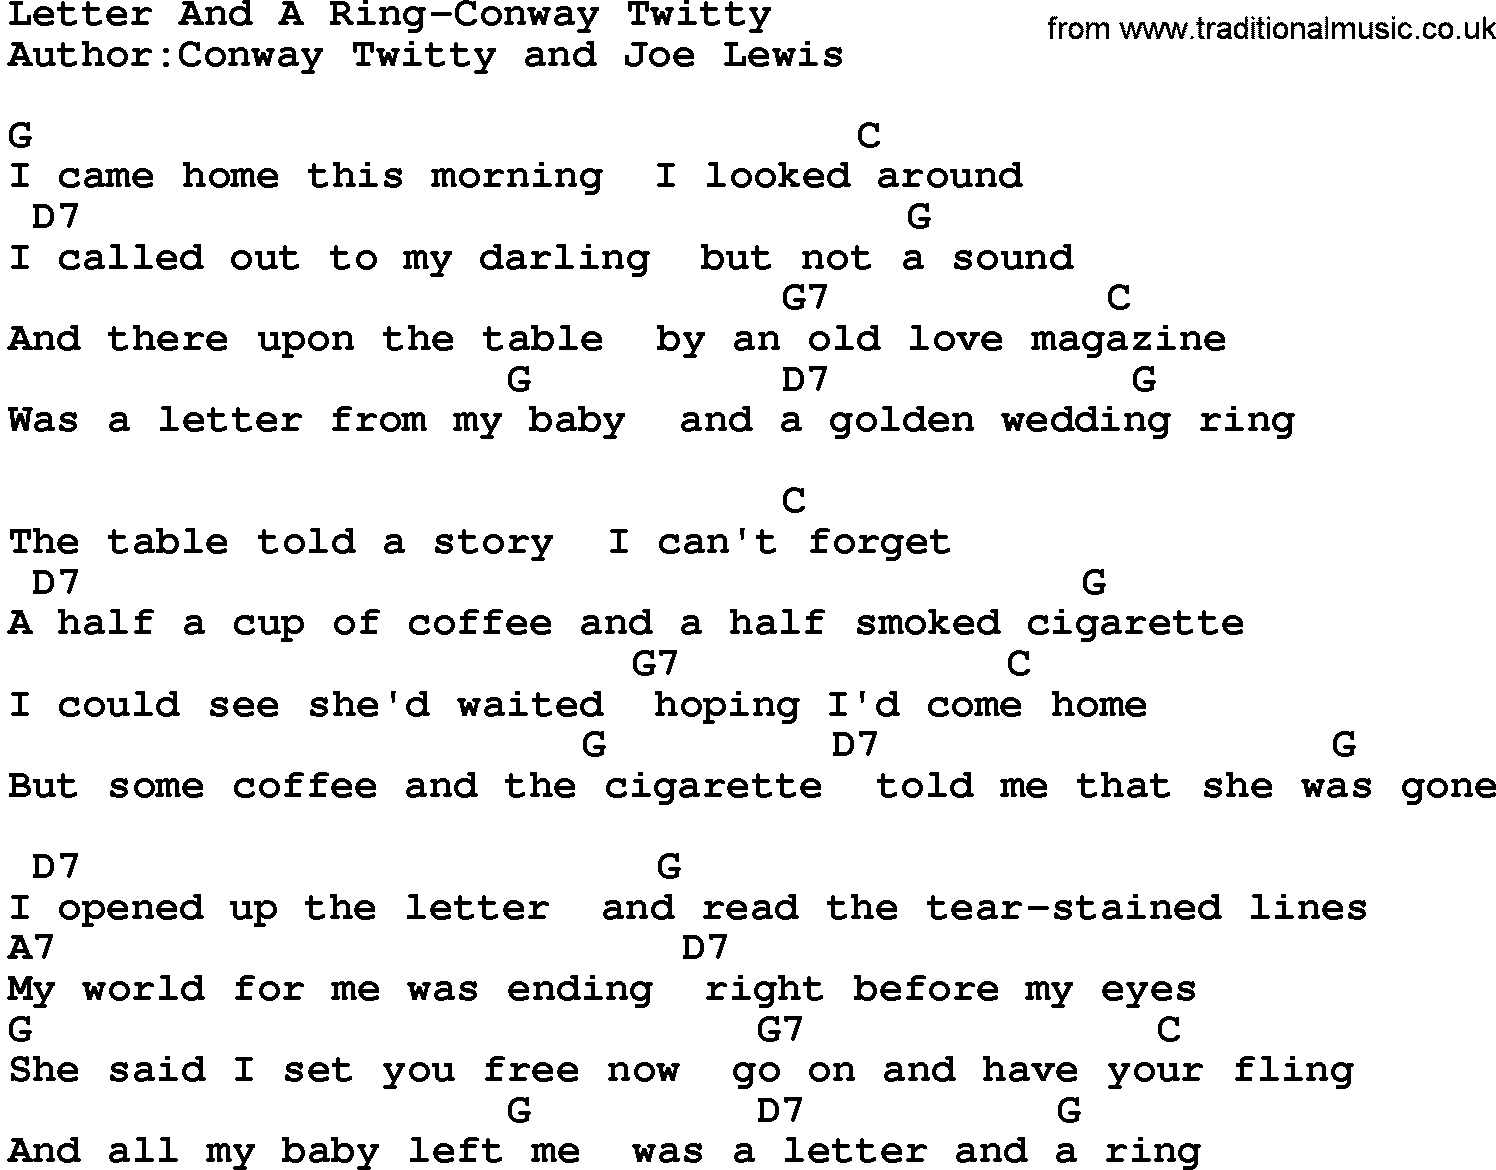 Country music song: Letter And A Ring-Conway Twitty lyrics and chords